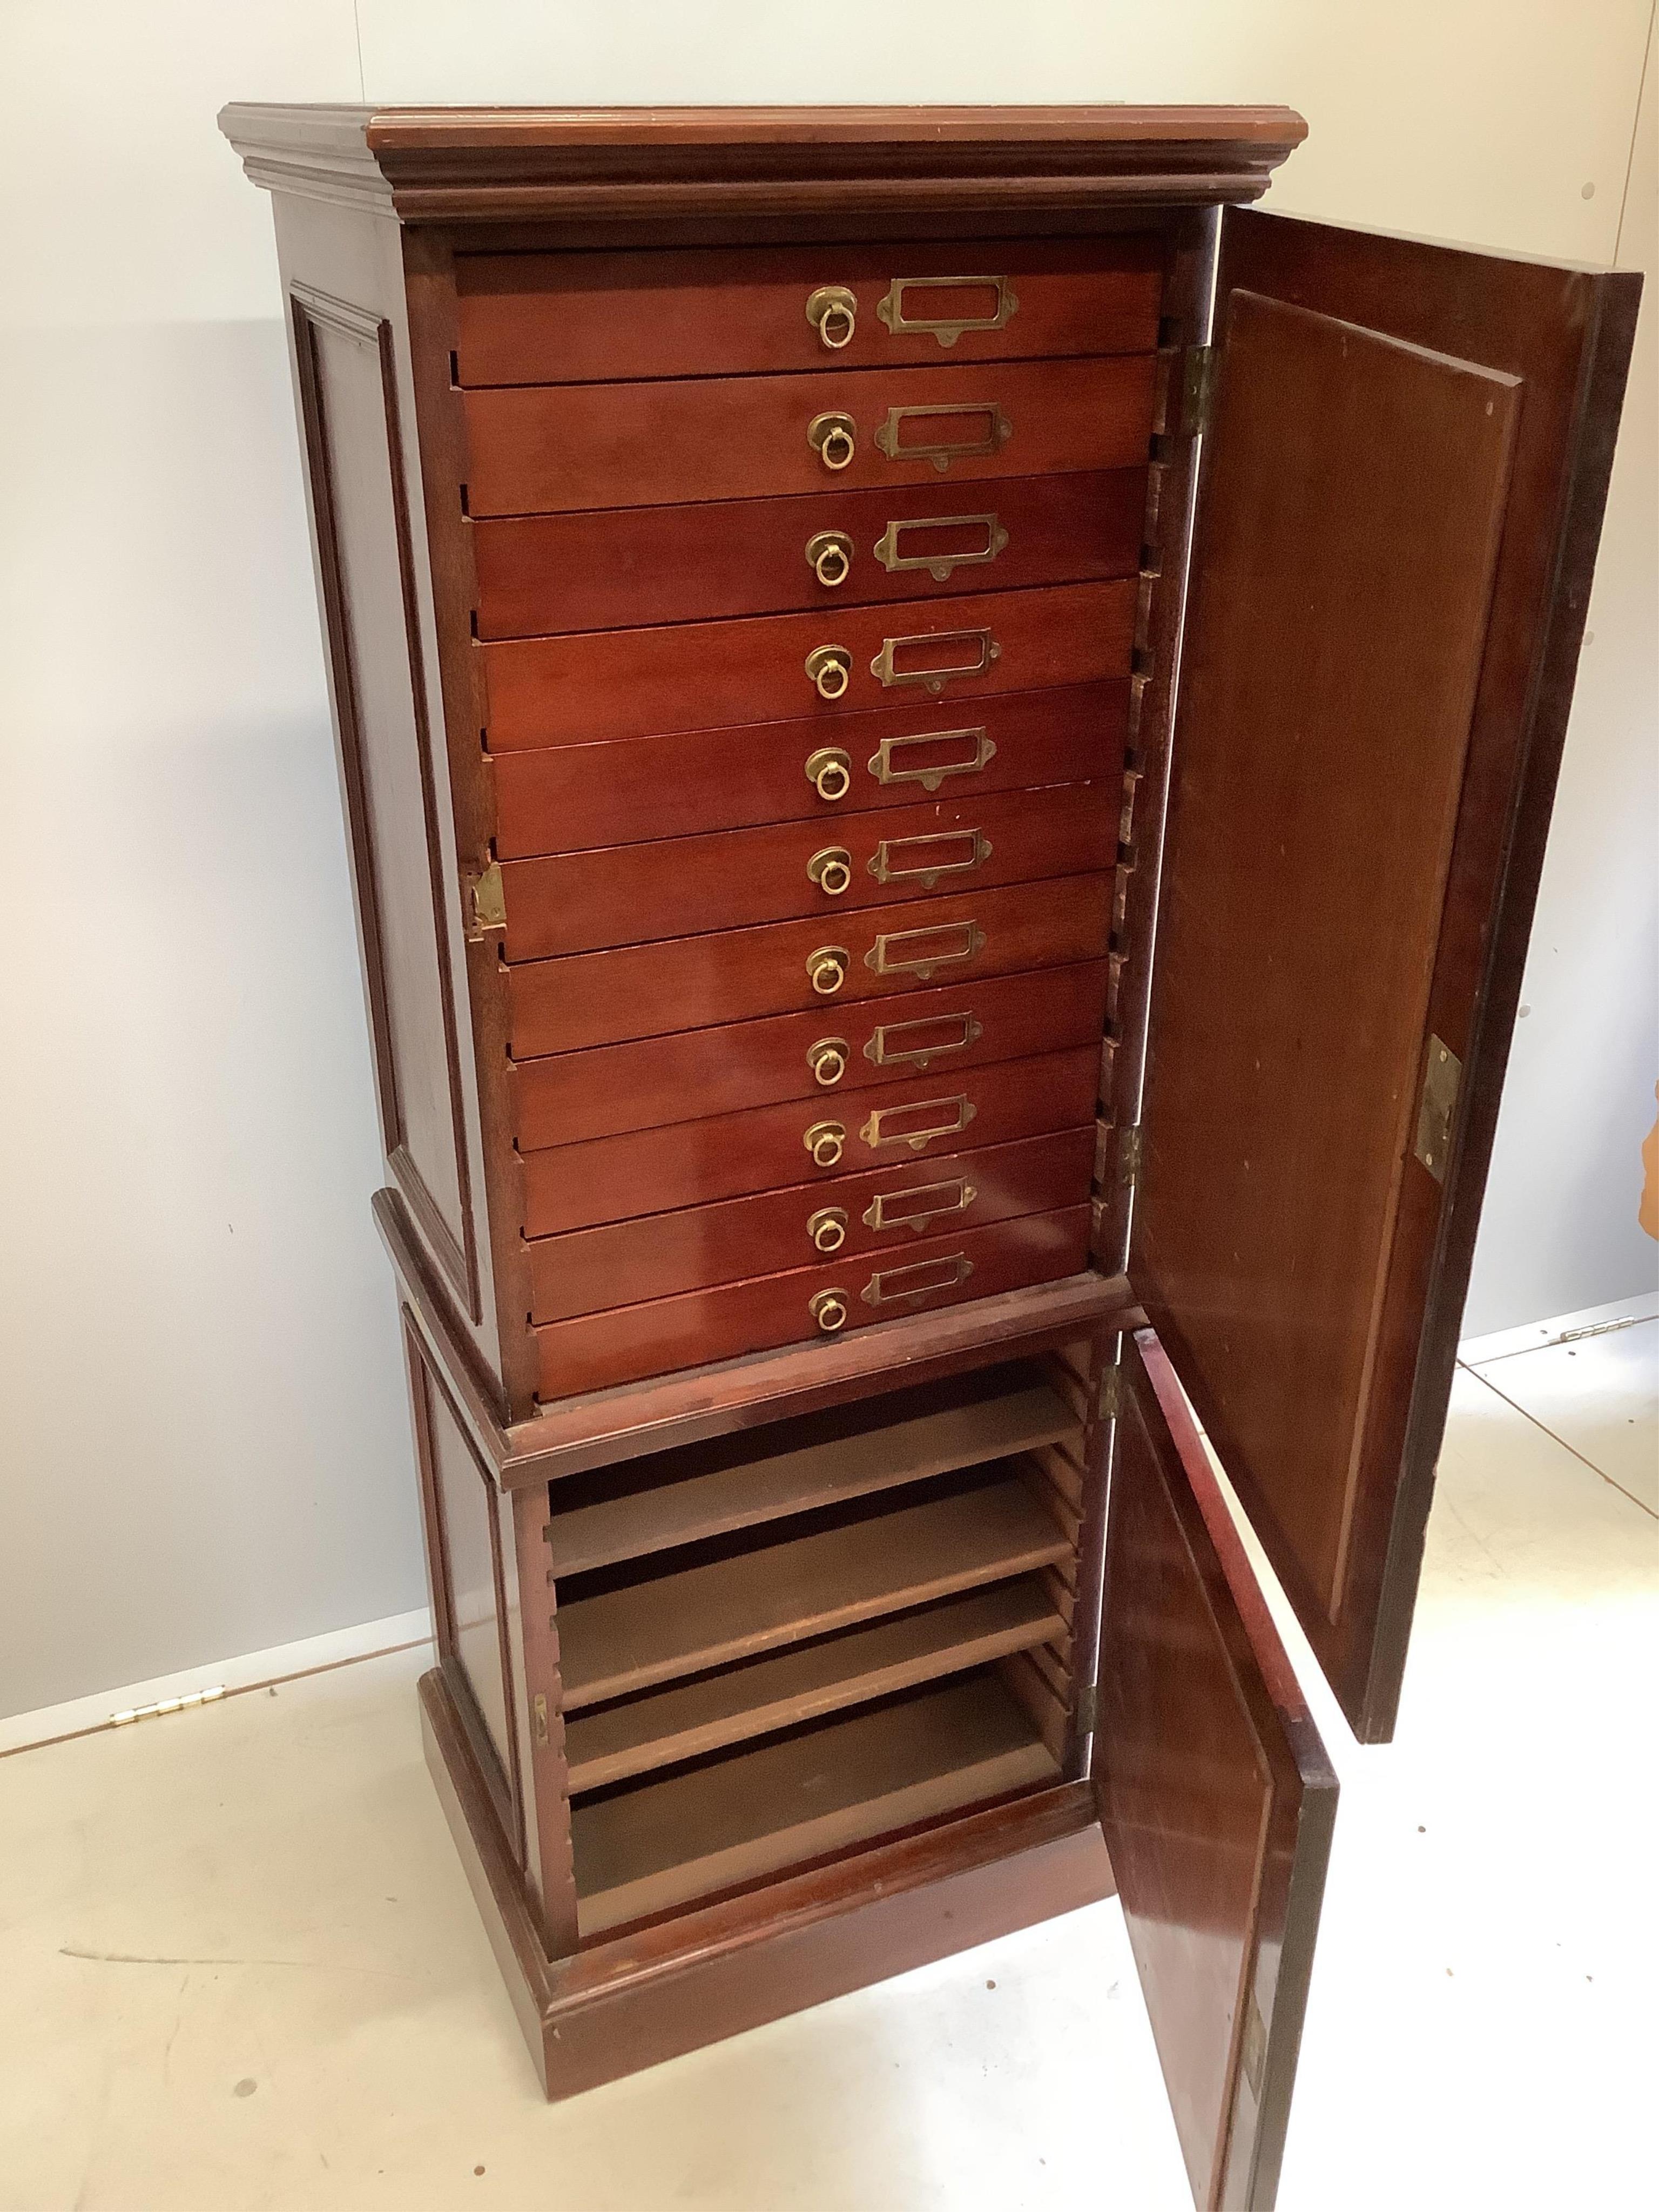 A Victorian style mahogany filing cabinet with dummy drawer front, width 53cm, depth 44cm, height 140cm. Condition - good